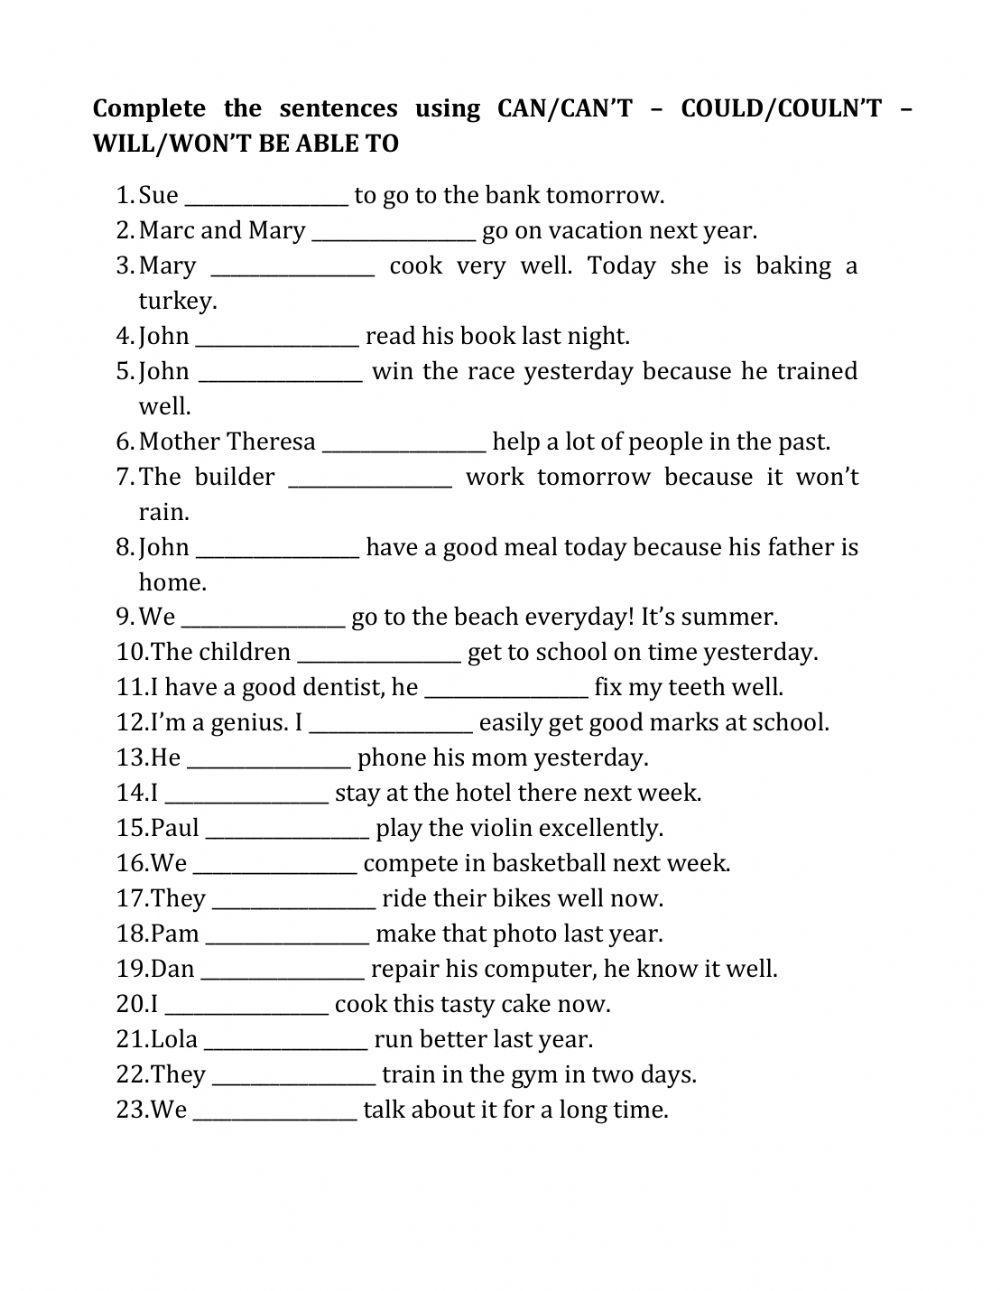 Can - could - will be able to worksheet | Live Worksheets